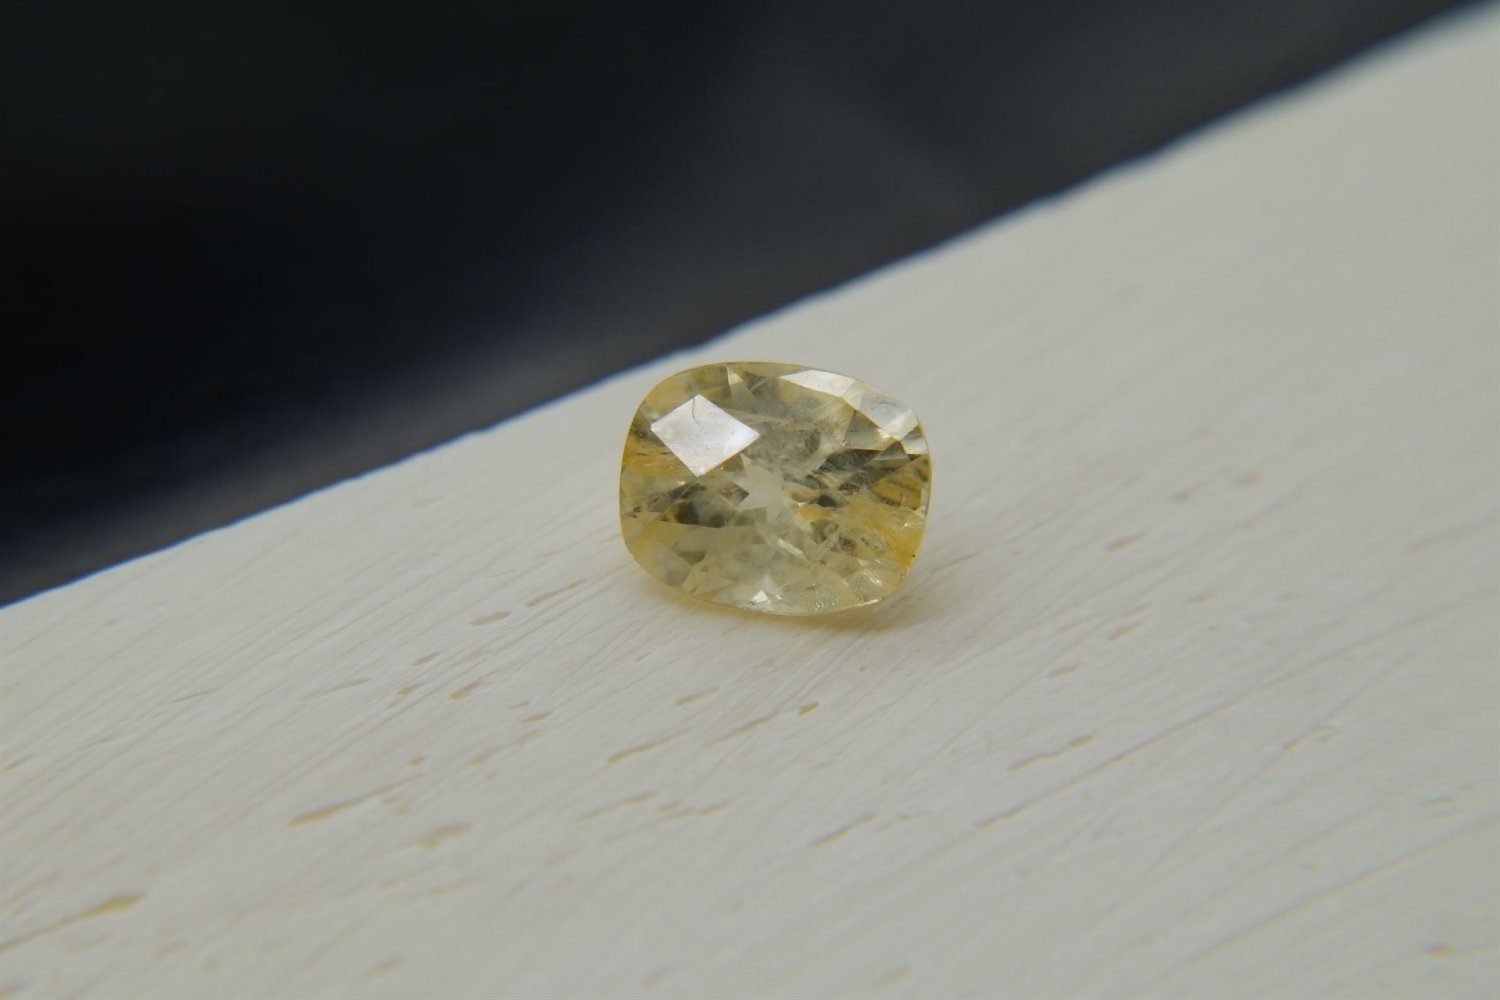 2.05 ct  Pastel Yellow Sapphire, handcrafted design cut premium handcrafted rectangular cut with lus